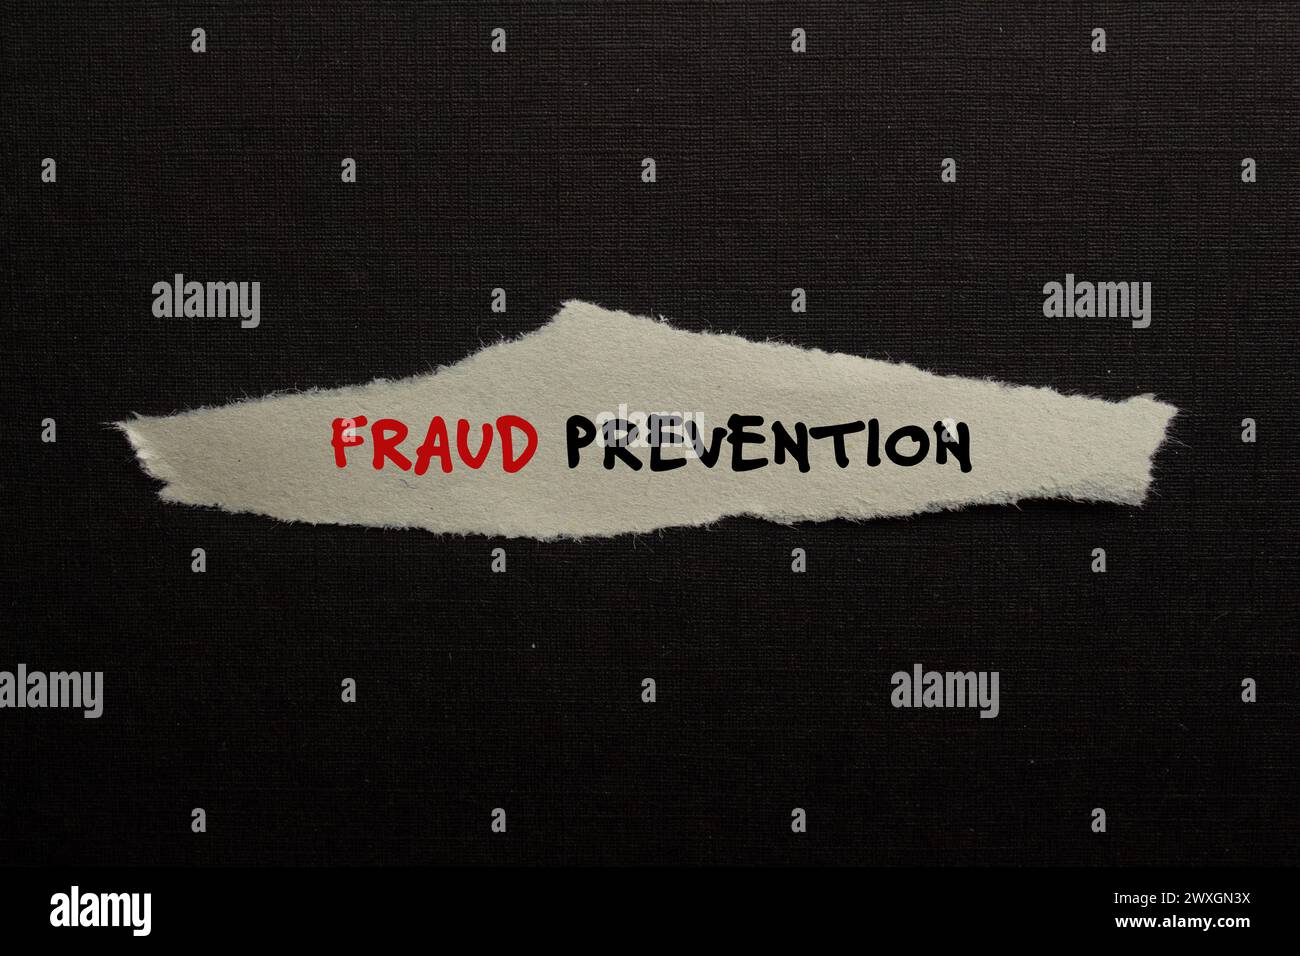 Fraud prevention words written on torn paper piece with black background. Conceptual symbol. Copy space. Stock Photo